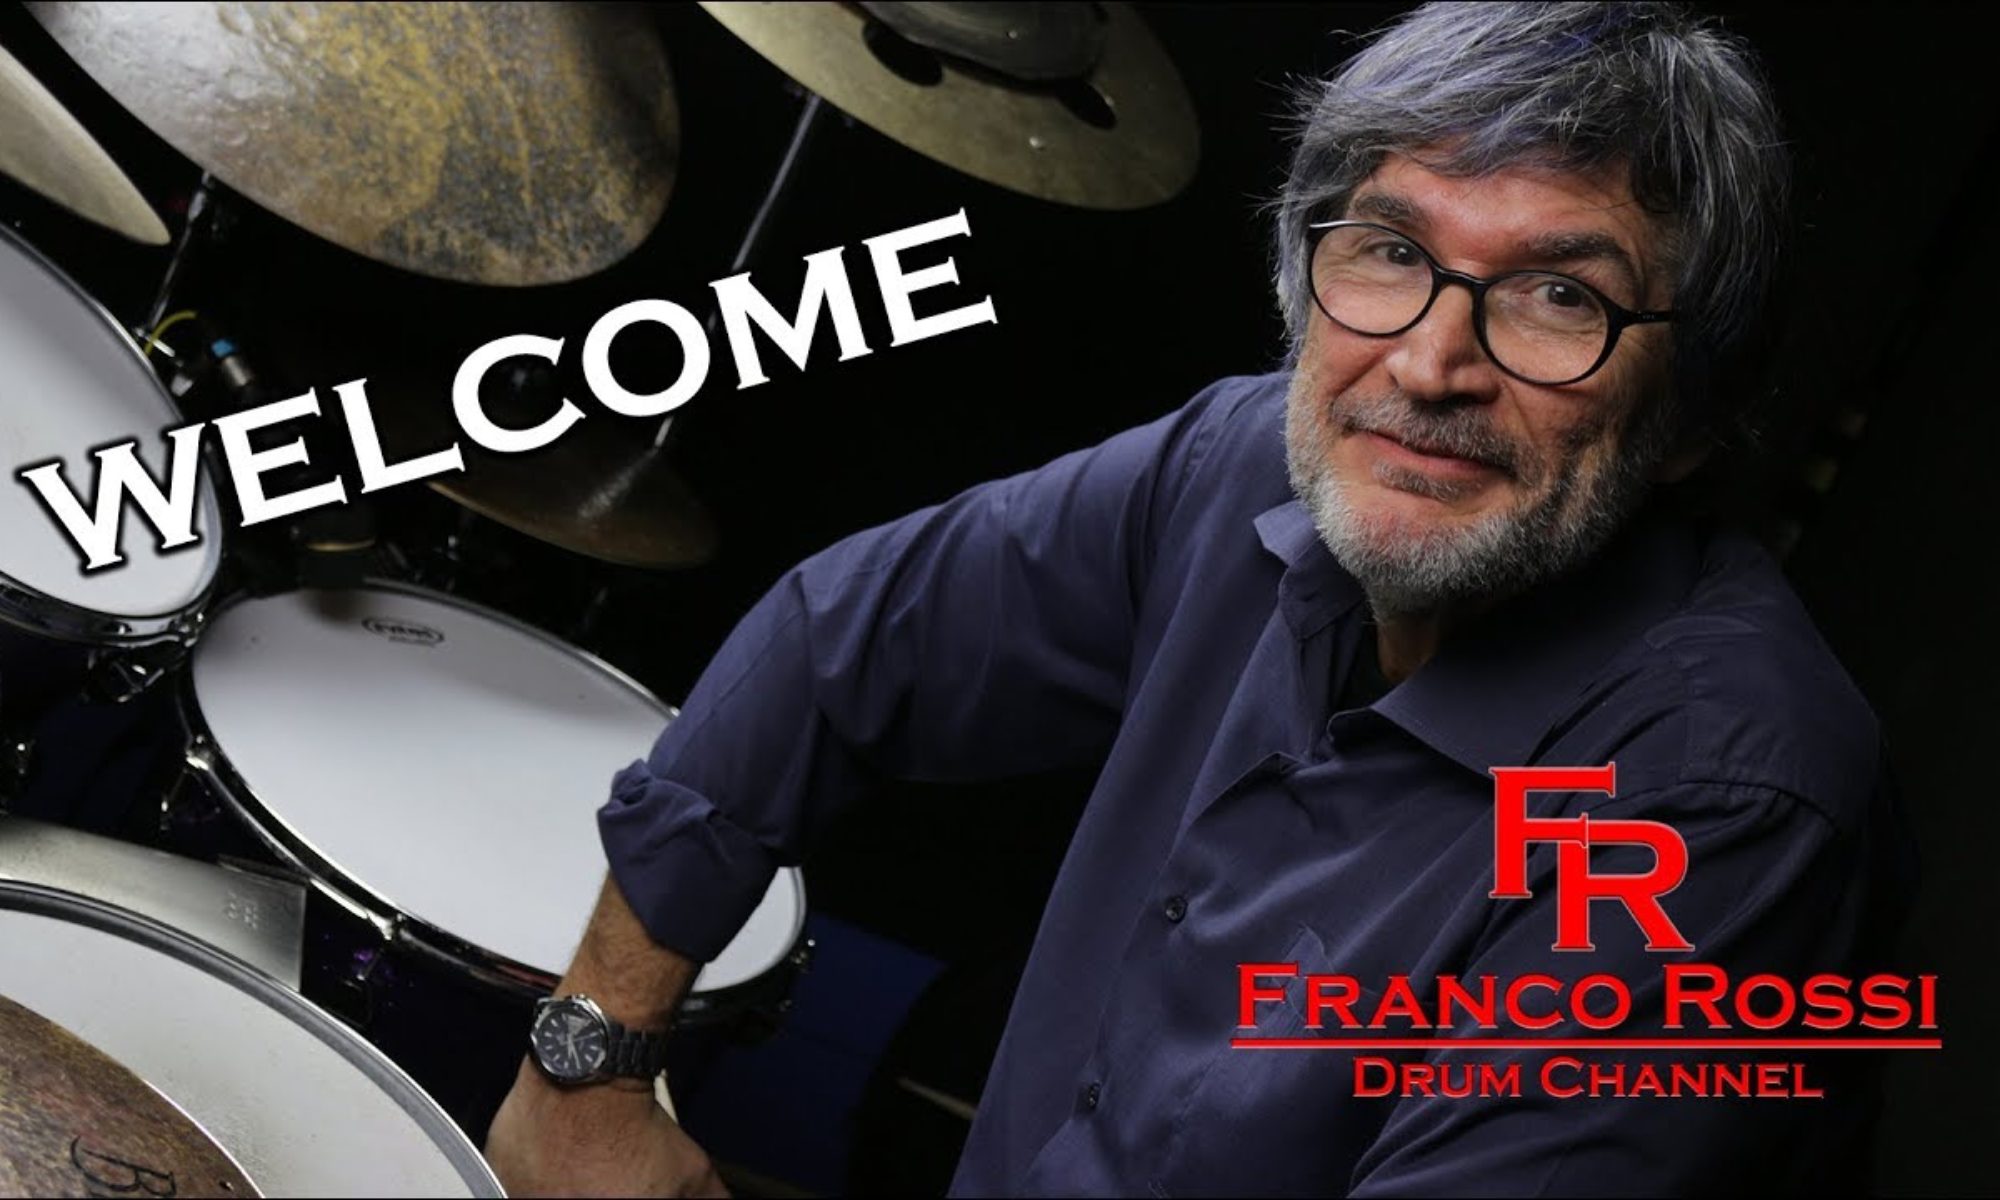 Franco Rossi Drum Channel